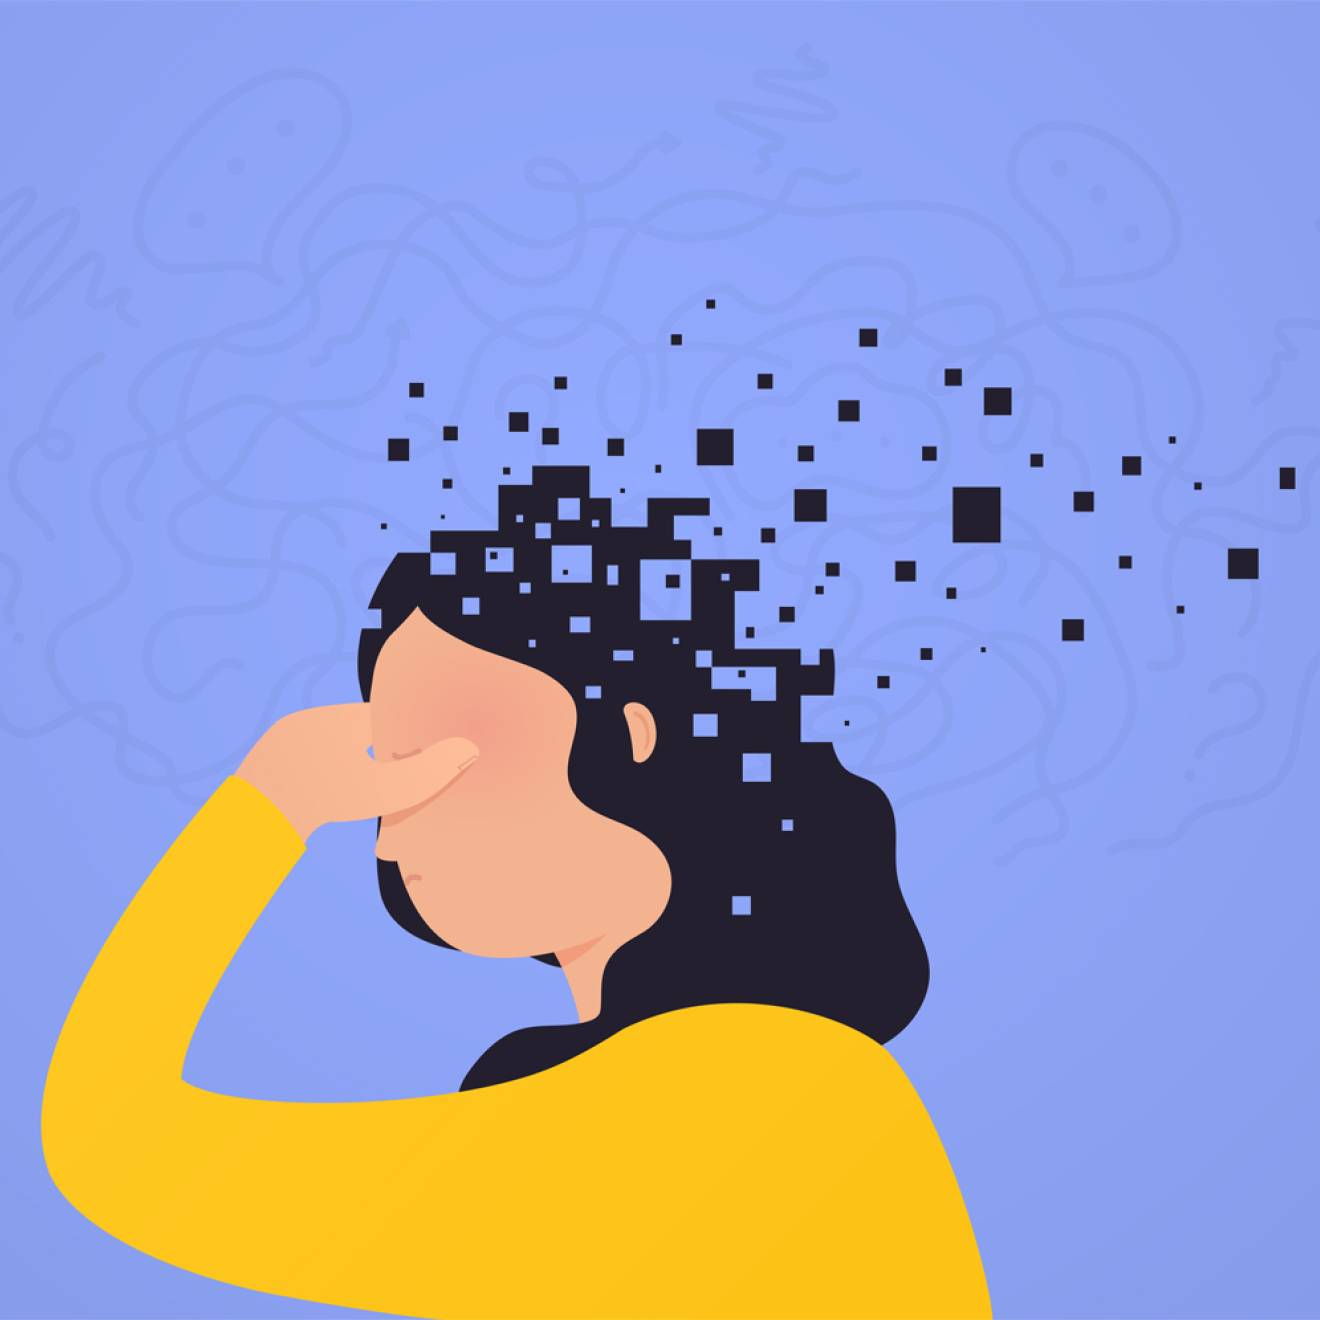 Simple, warm illustration of a woman in a yellow shirt holding her head, with little squares trailing behind her, signifying mental fragmentation, on a lilac background